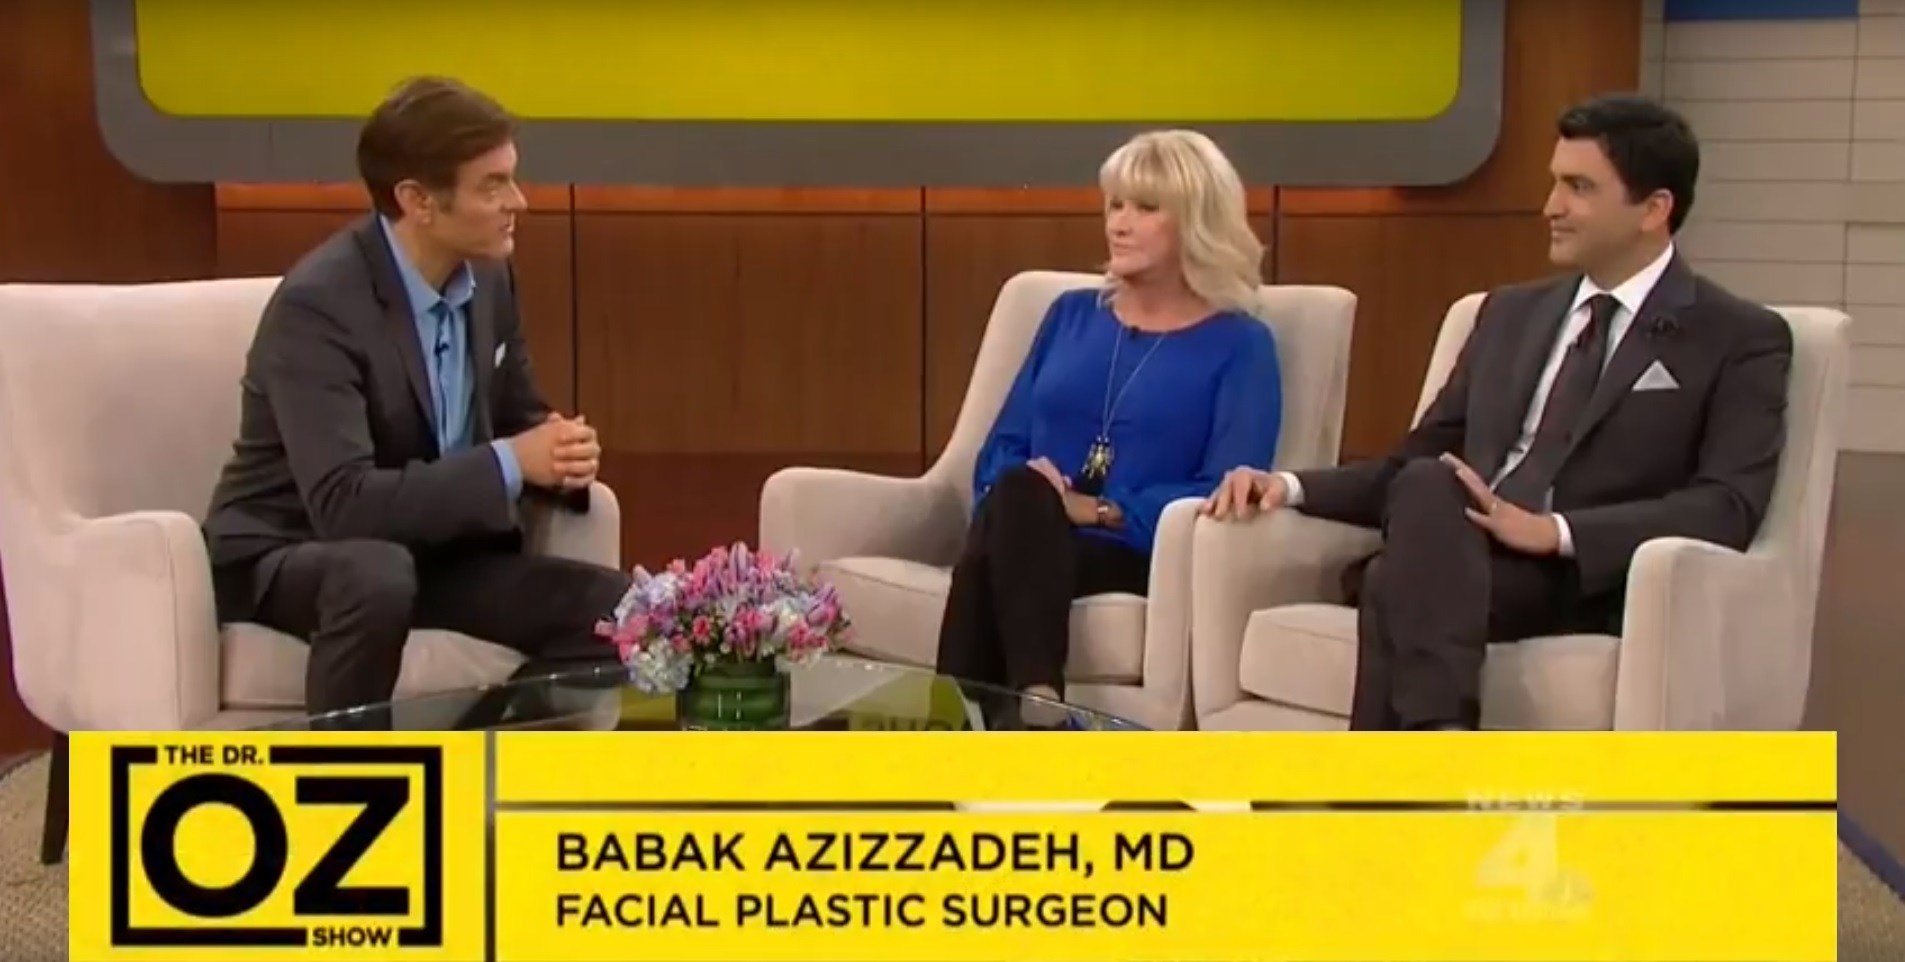 Dr. Babak Azizzadeh Presents Groundbreaking Smile Surgery for Bell’s Palsy and Facial Paralysis on Dr. Oz